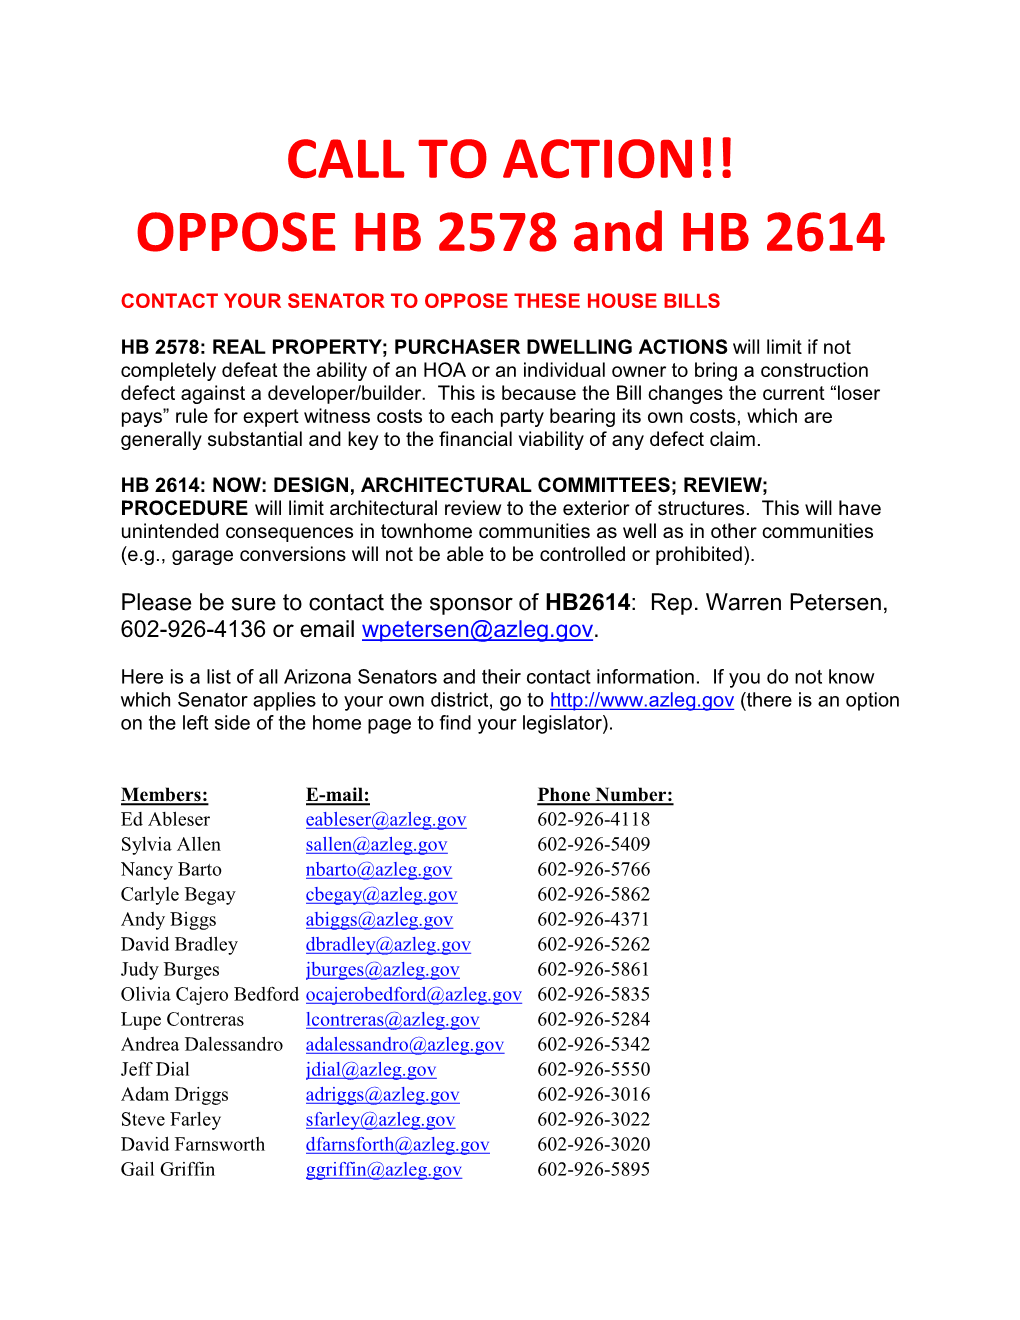 OPPOSE HB 2578 and HB 2614